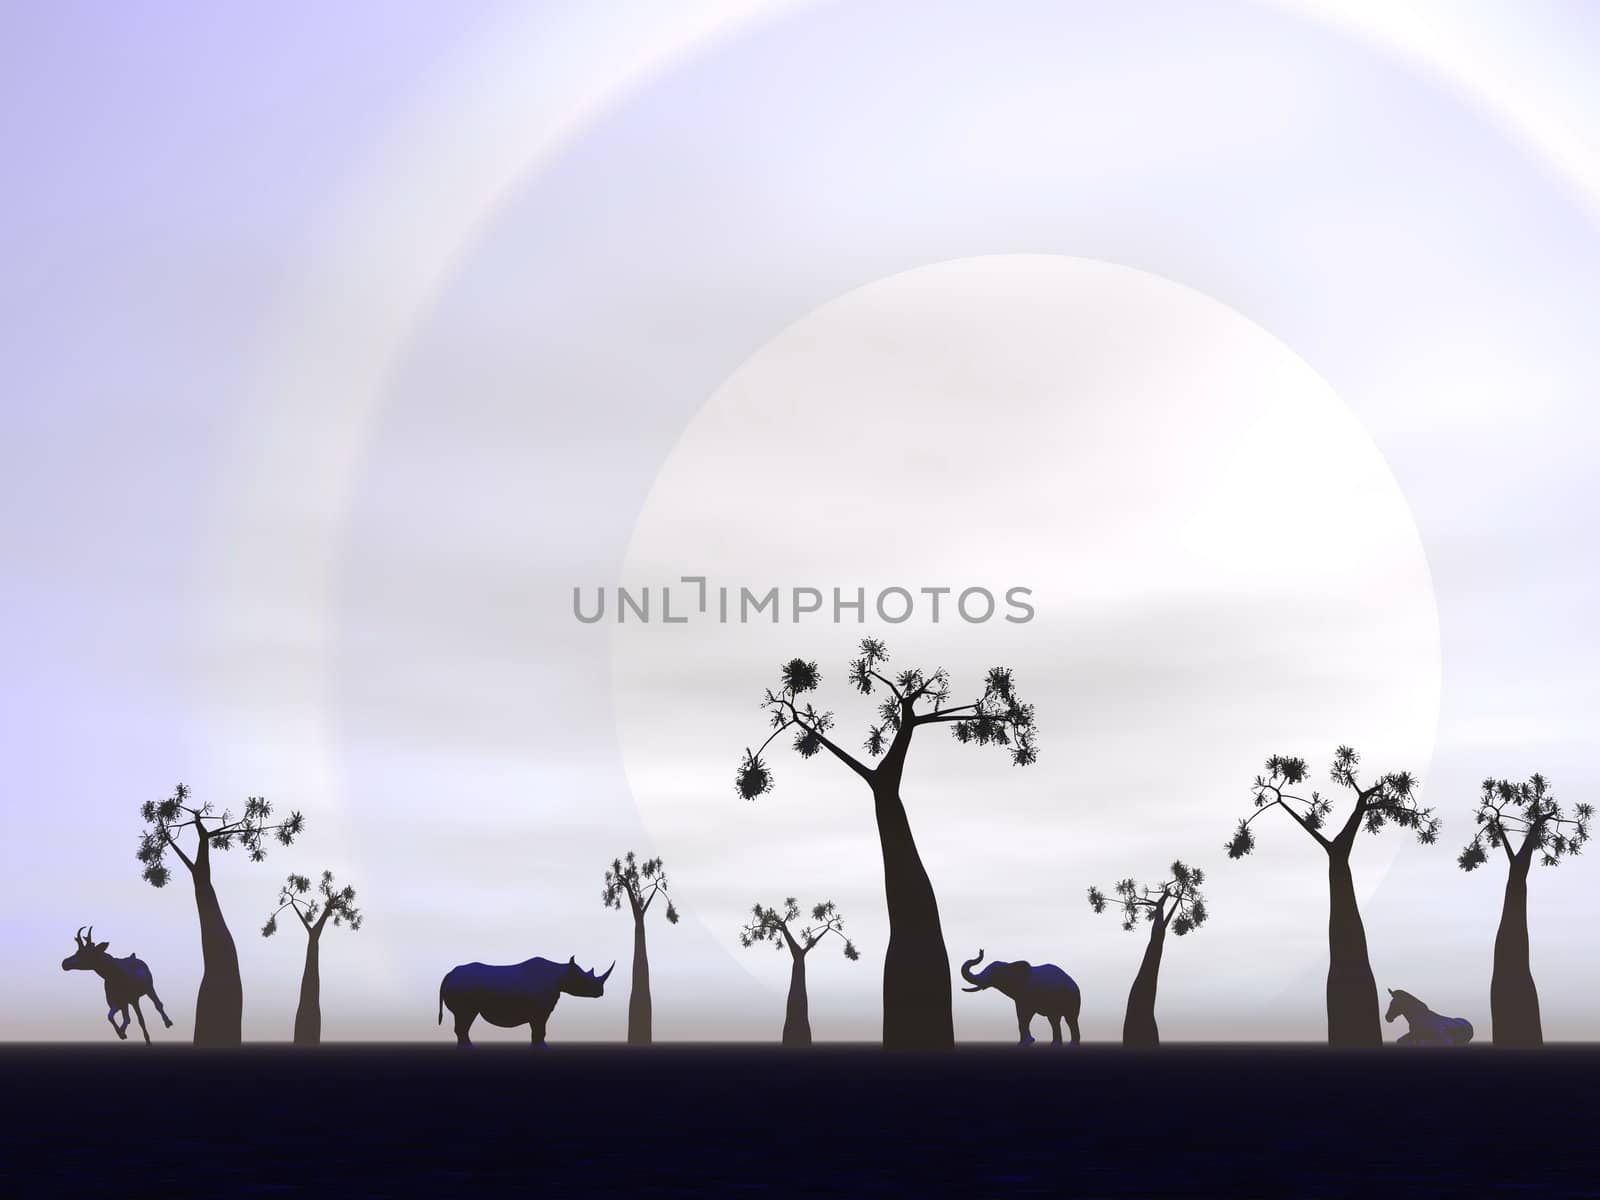 Shadows of animals in the savannah next to baobabs by hard sunset